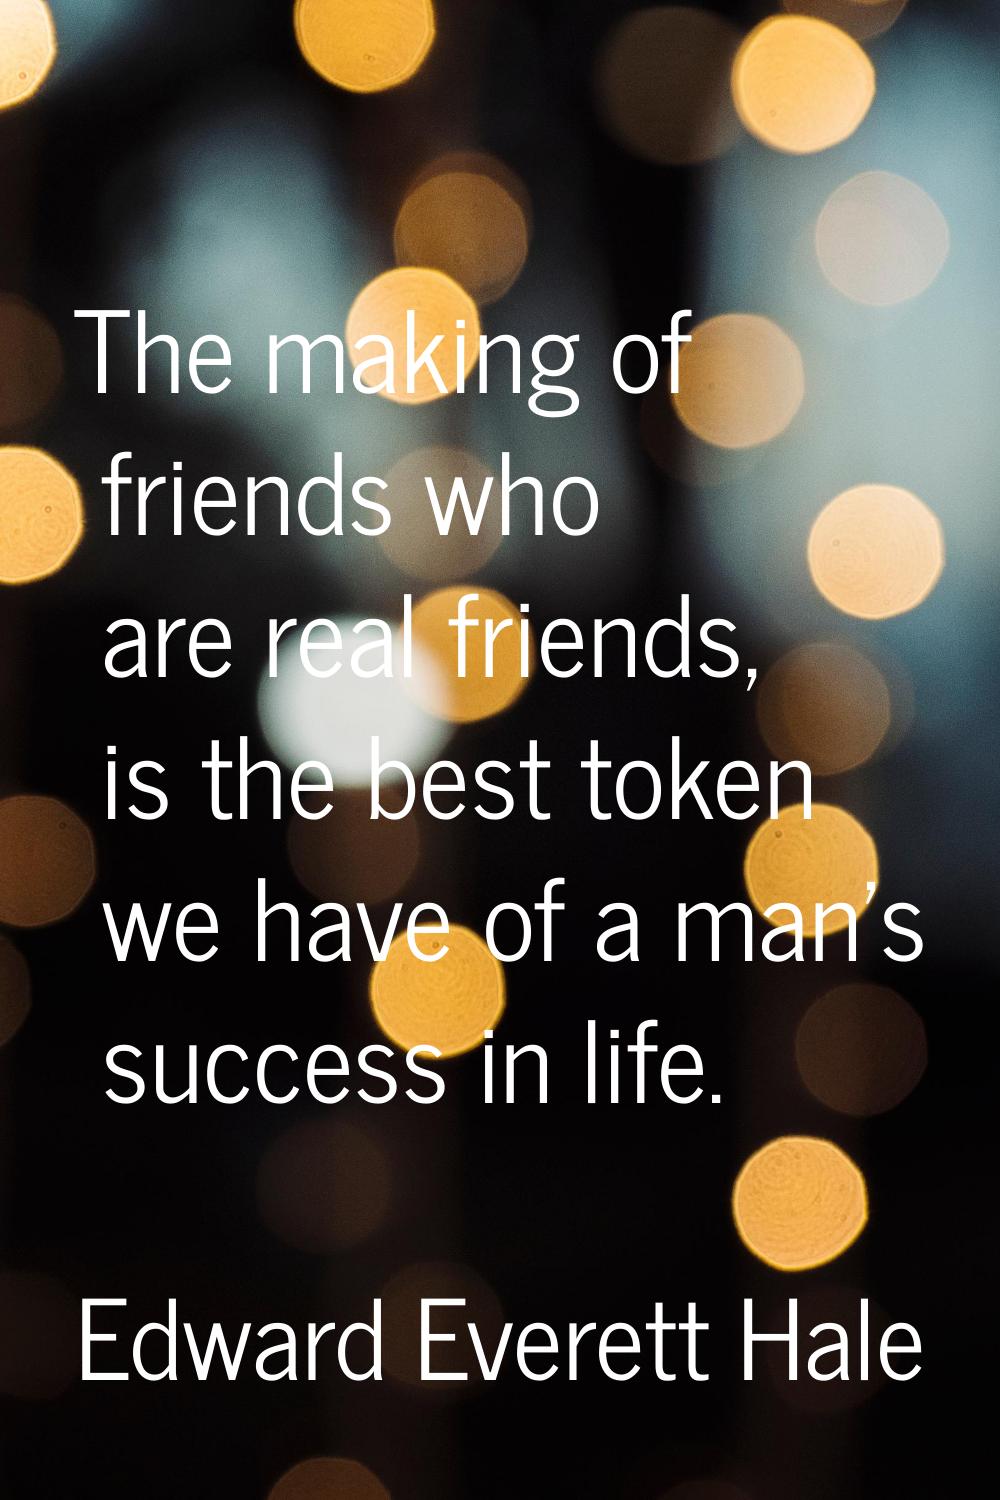 The making of friends who are real friends, is the best token we have of a man's success in life.